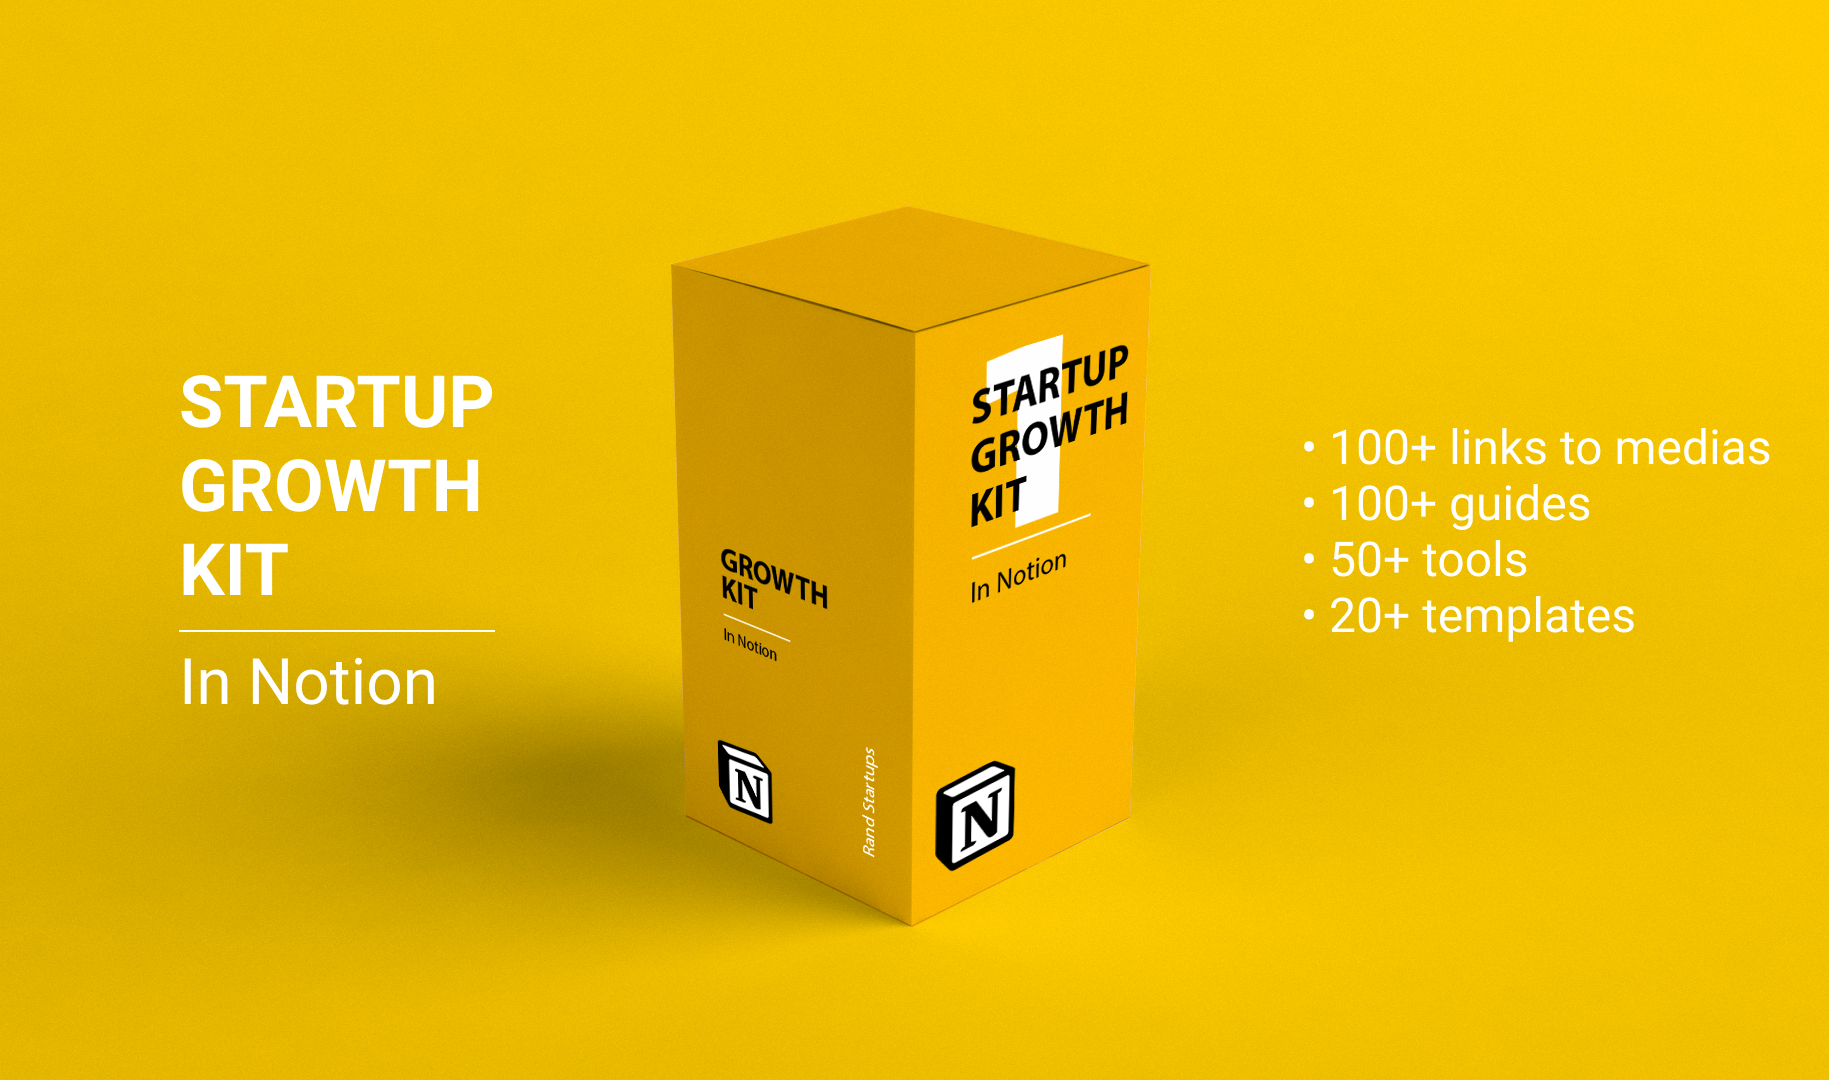 Startup Growth KIT Product Hunt Image